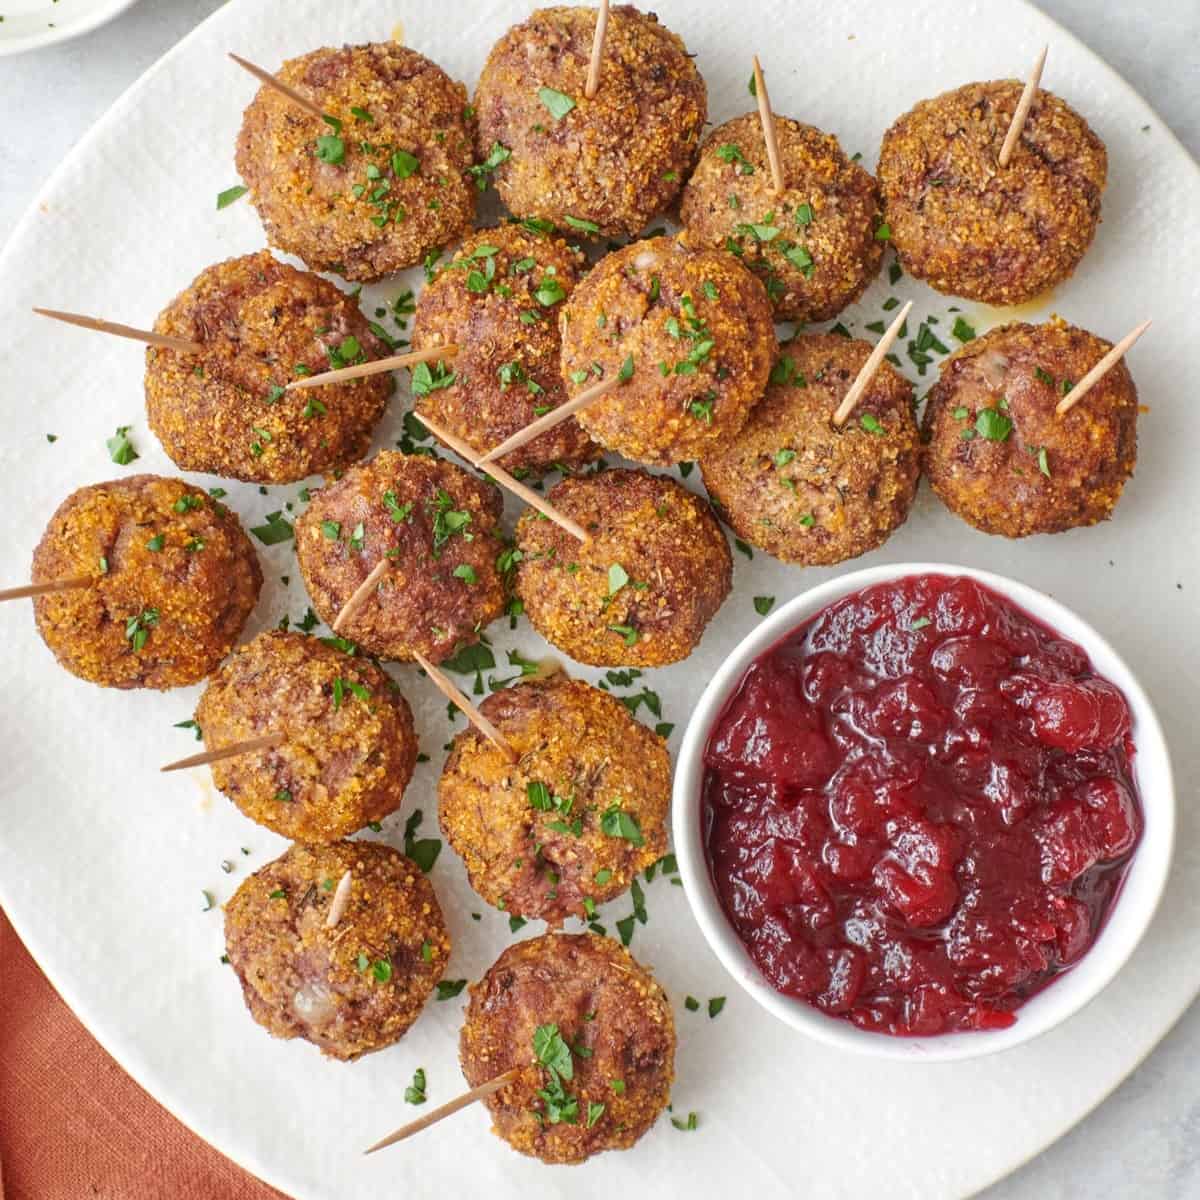 Brie cheese stuffed meatballs with toothpicks in each one and a small dish of cranberry sauce.